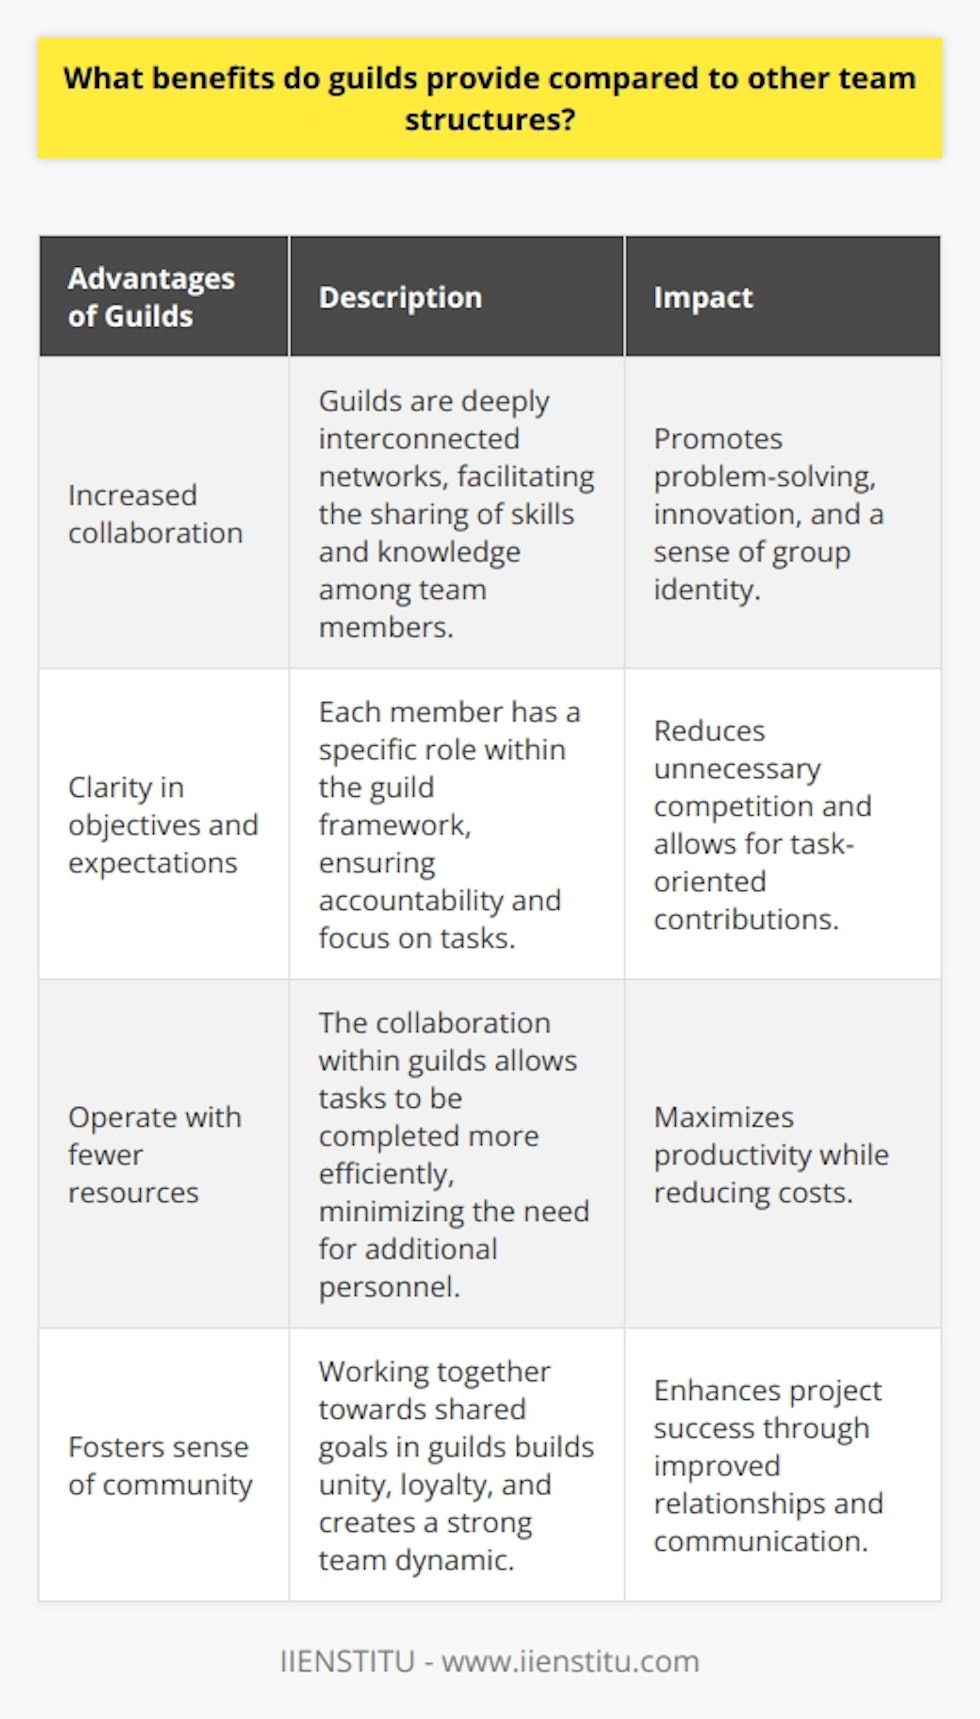 Guilds, as a type of team organization, offer several unique benefits compared to other team structures. These advantages make guilds an attractive option for businesses, organizations, and other entities.One primary advantage of guilds is the increased level of collaboration among team members. Guilds are designed as deeply interconnected networks, where each member understands their respective roles, capabilities, and strengths. This interconnectedness allows team members to leverage one another's skills and knowledge to solve problems and generate innovative solutions. Unlike traditional hierarchical structures, guilds promote the easy and rapid sharing of information, empowering team members and fostering a sense of group identity.Guild structures also provide clarity in objectives and expectations. Each member has a specific role within the larger guild framework and is held accountable to the team. This clear structure and accountability allow team members to focus on their tasks and contribute to the team's success rather than engaging in unnecessary competition.Furthermore, guilds enable teams to operate with fewer resources. The increased collaboration among team members ensures tasks are shared and completed more efficiently compared to other team structures. Additionally, as guilds have shared objectives and expectations, teams can maximize their productivity without the need to hire additional personnel.Lastly, guilds are effective at fostering a sense of community among team members. As the team works together towards shared goals, a strong sense of unity and loyalty is formed, which can greatly contribute to the success of the overall project. Guilds also provide a platform for team members to receive feedback, build relationships, and socialize, further enhancing the team dynamic.In conclusion, guilds offer numerous advantages over traditional team structures. They enhance collaboration, foster a sense of community, operate effectively with fewer resources, and provide clear objectives and expectations. For businesses, organizations, or any entity seeking to implement a team structure, guilds provide an efficient and effective system that can drive success.